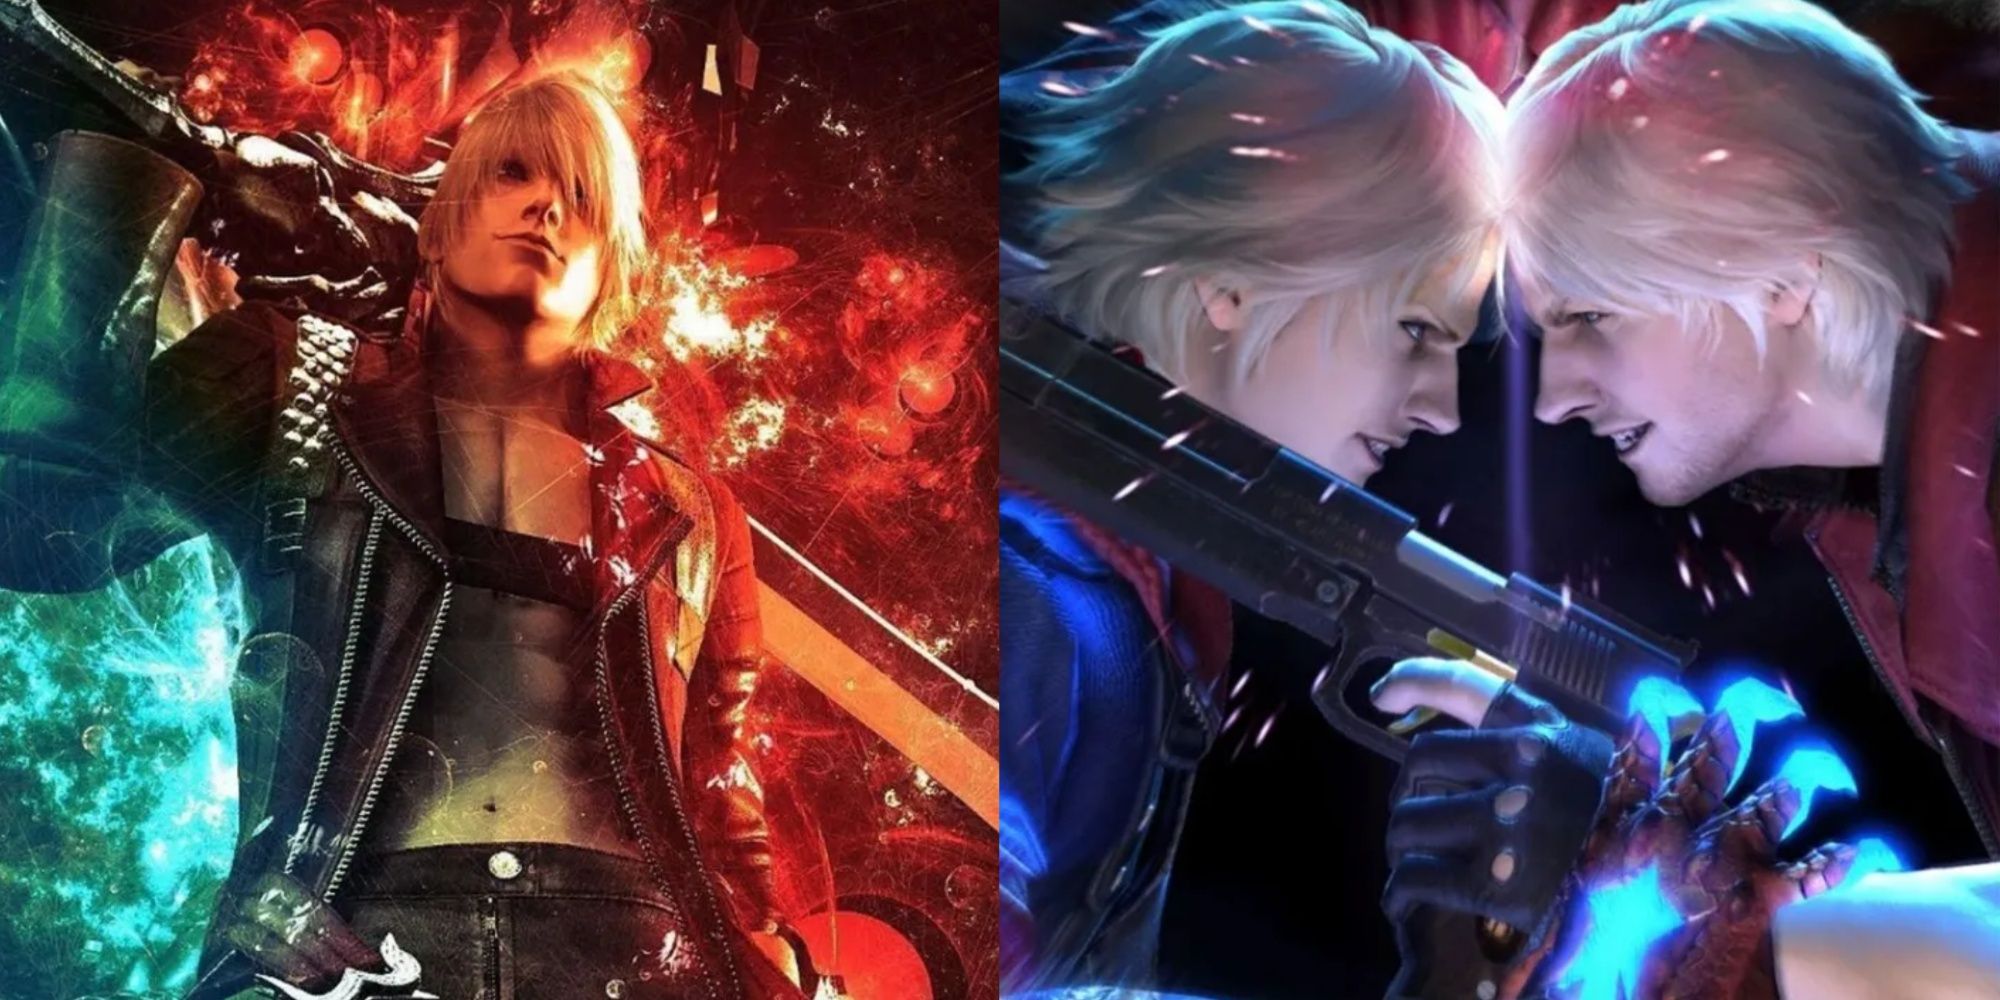 Best Devil May Cry Games According To Metacritic